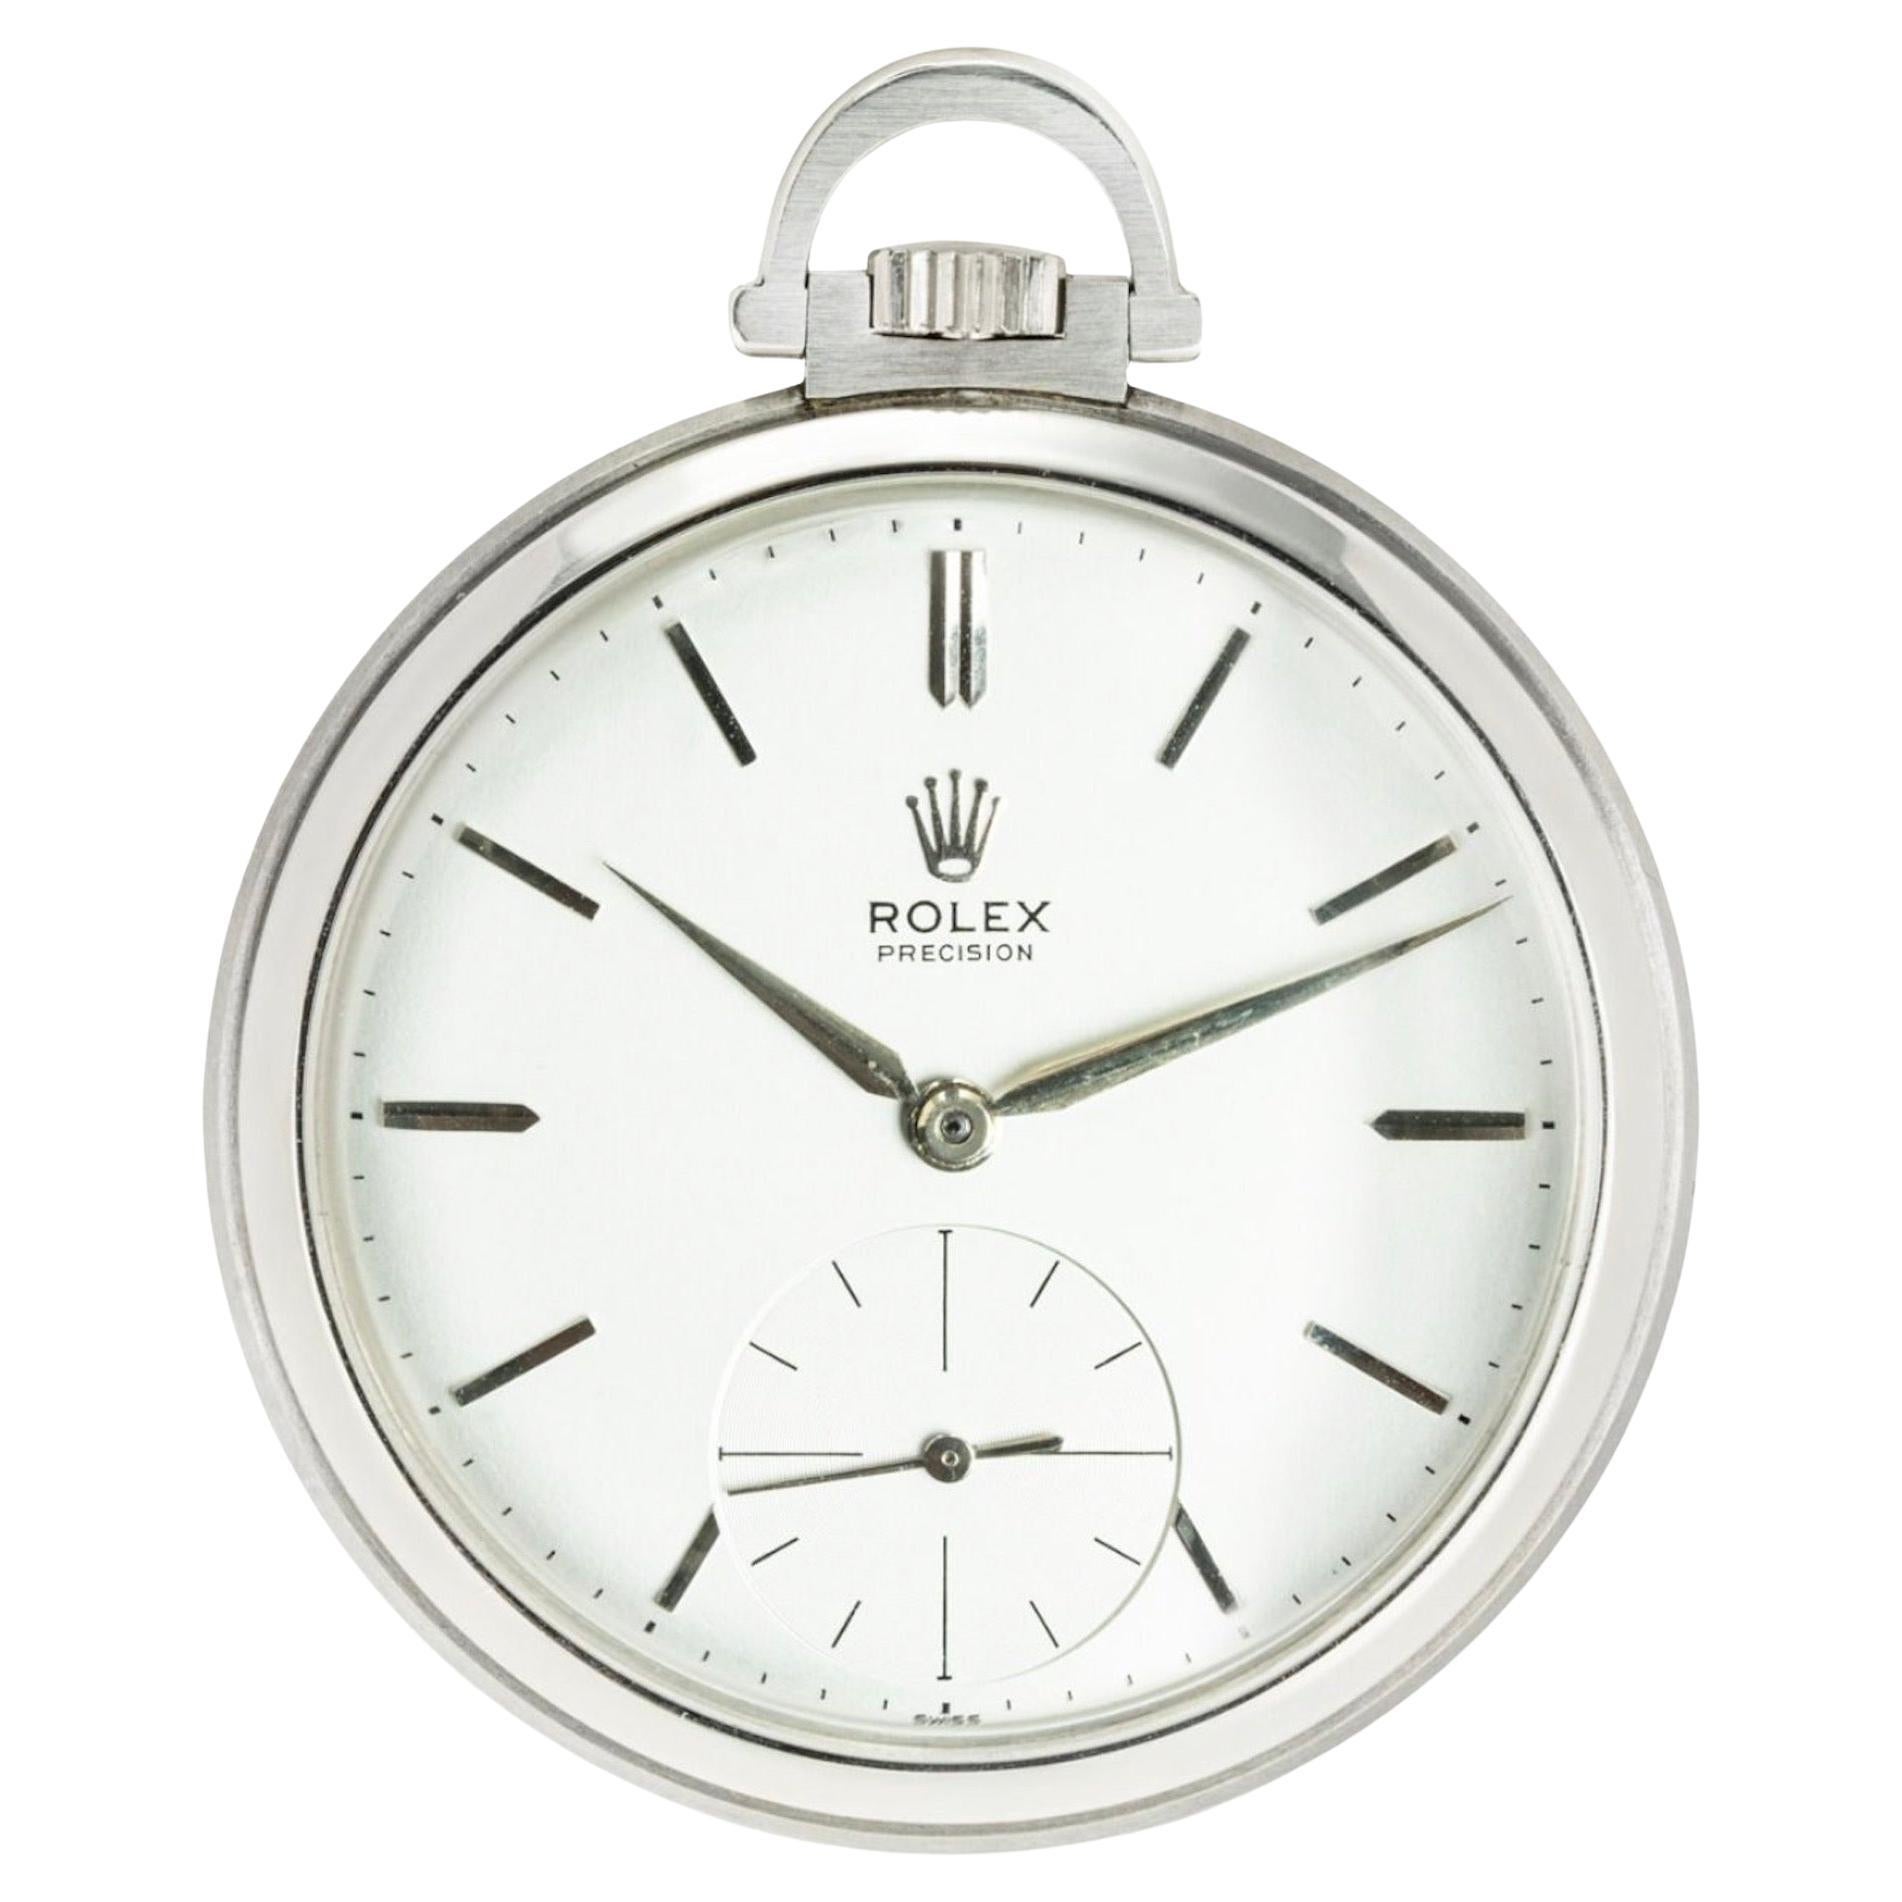 Rare & Important Rolex Precision Keyless Lever Stainless Steel Pocket Watch For Sale